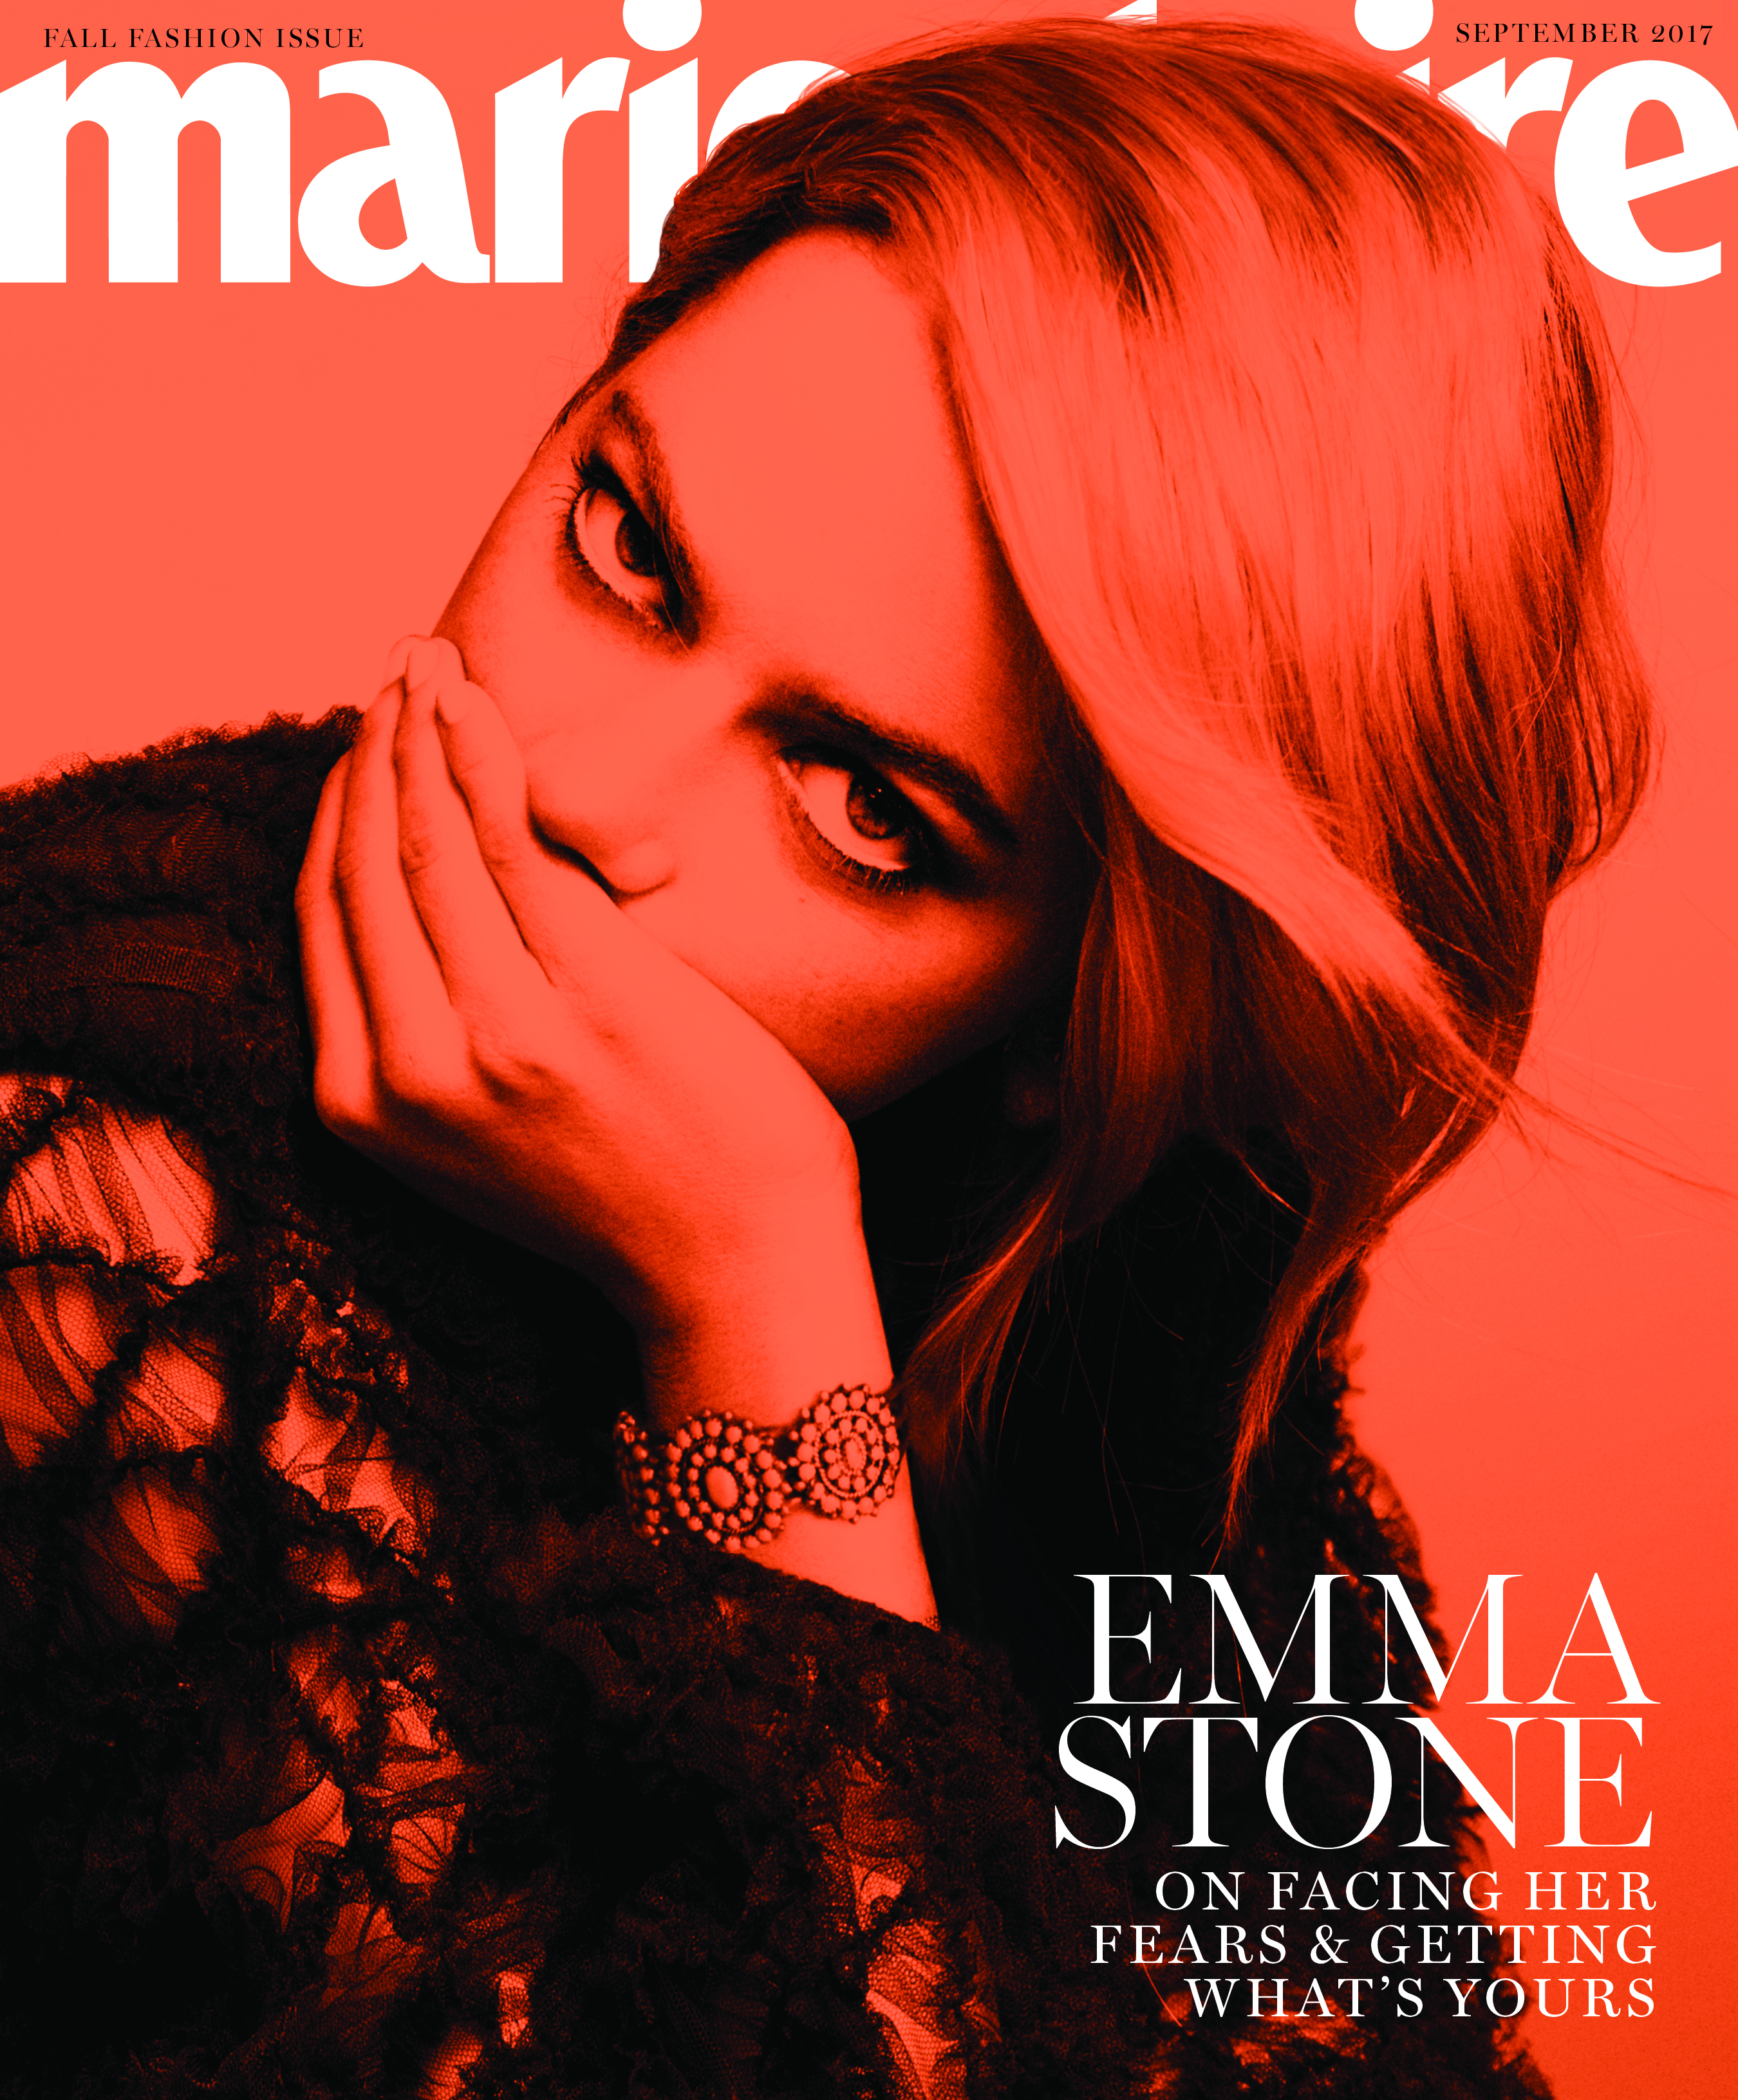 Marie Claire - Emma Stone, September 2017